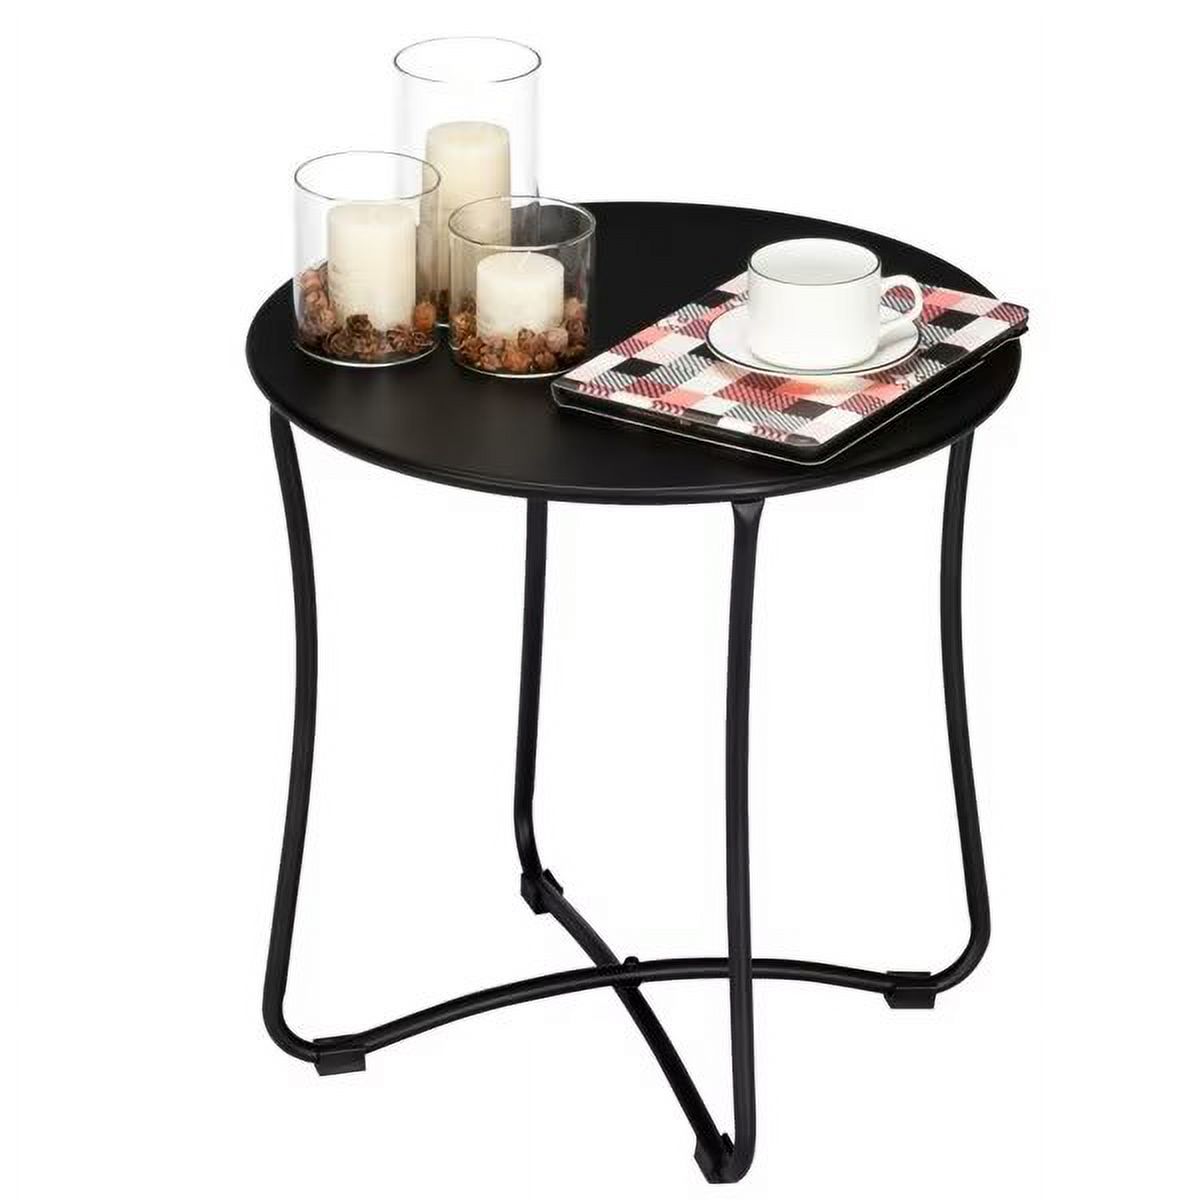 18" Patio Portable Side Table, Waterproof Round Metal Steel Side Table, Terrace Wrought Iron Side Table, Weather Resistant Portable Outdoor and Indoor End Table, for Garden Balcony Yard, Black - image 5 of 7